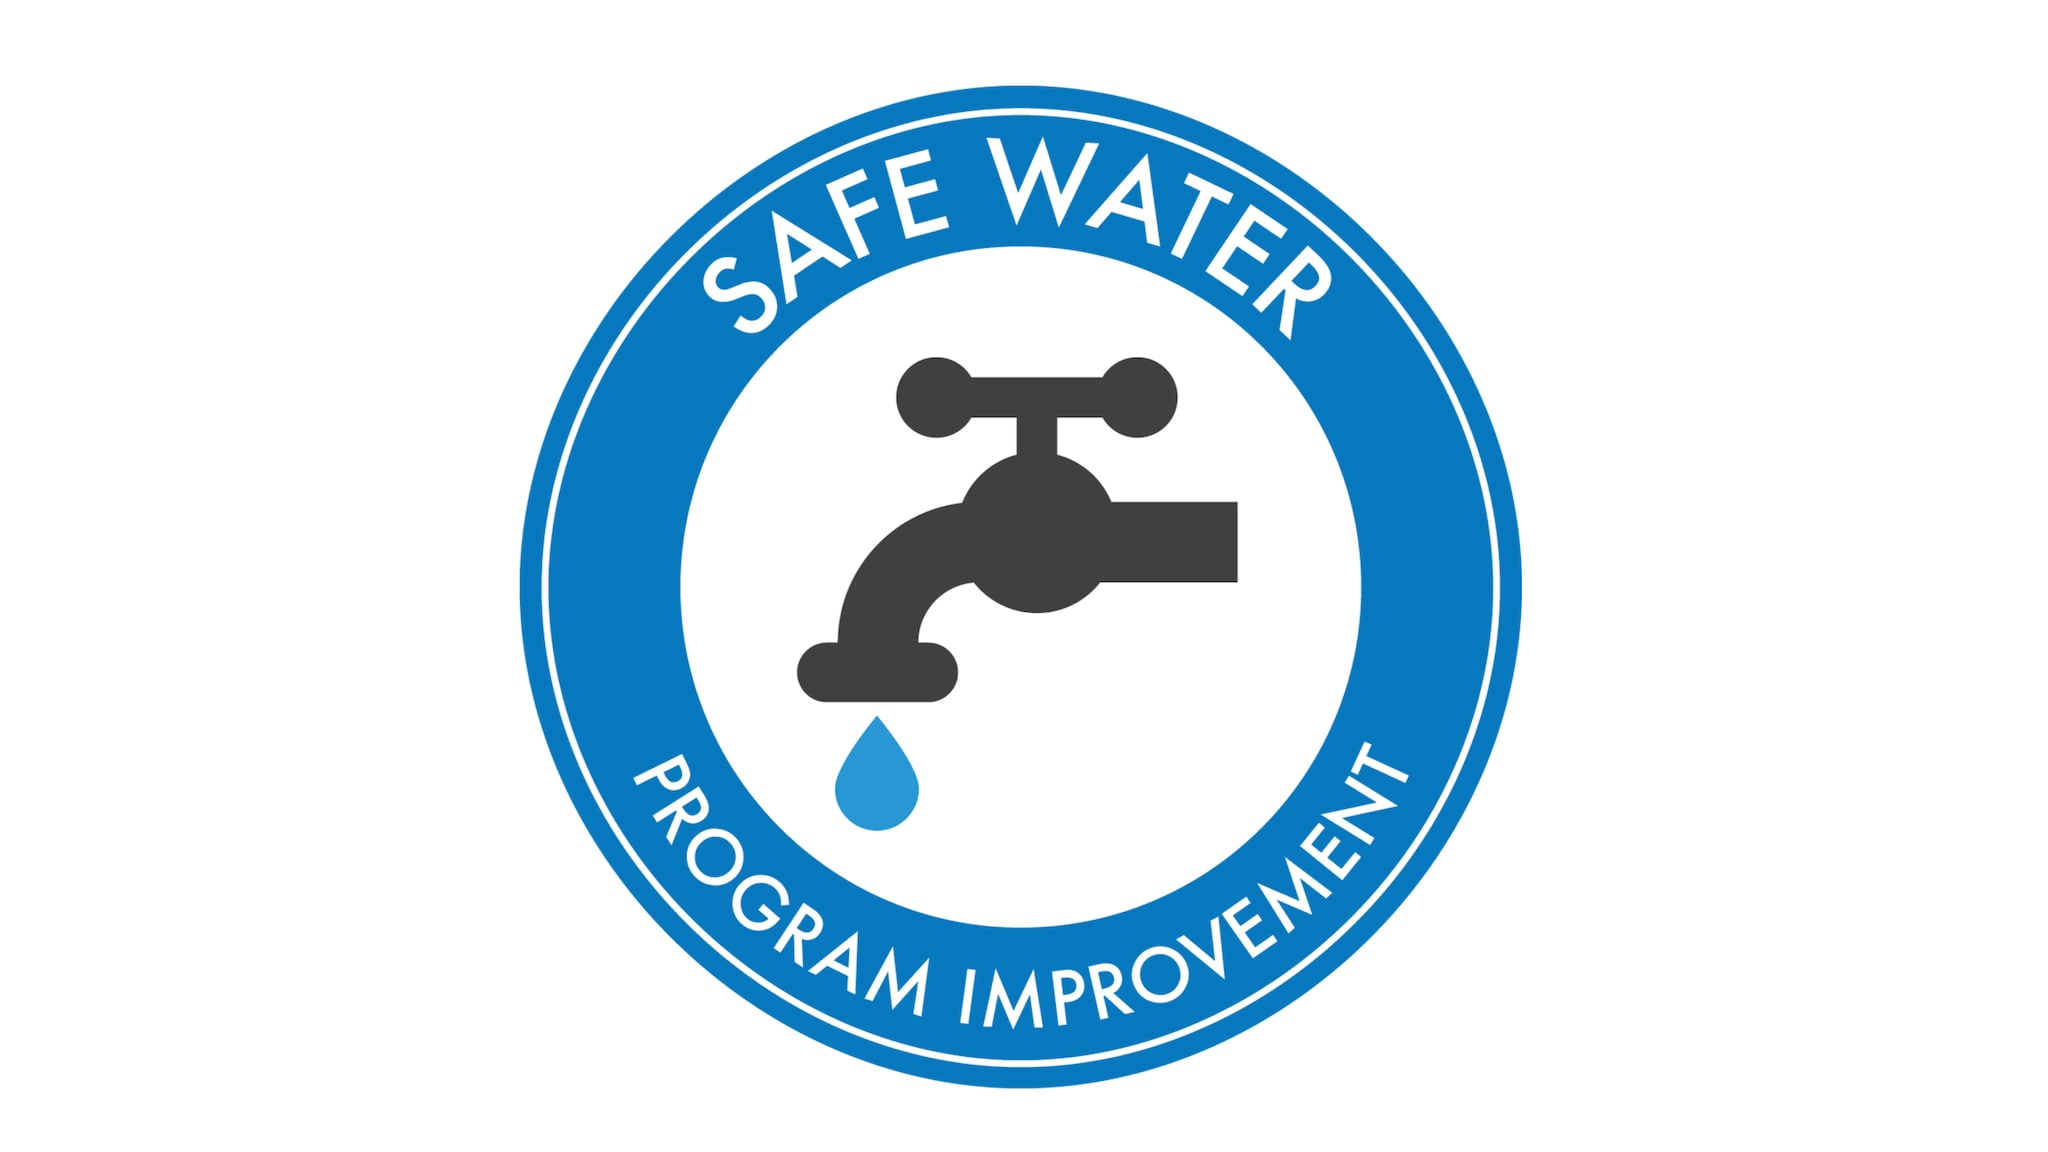 Circle graphic of a faucet with the words "safe water program improvement" written around the outside.